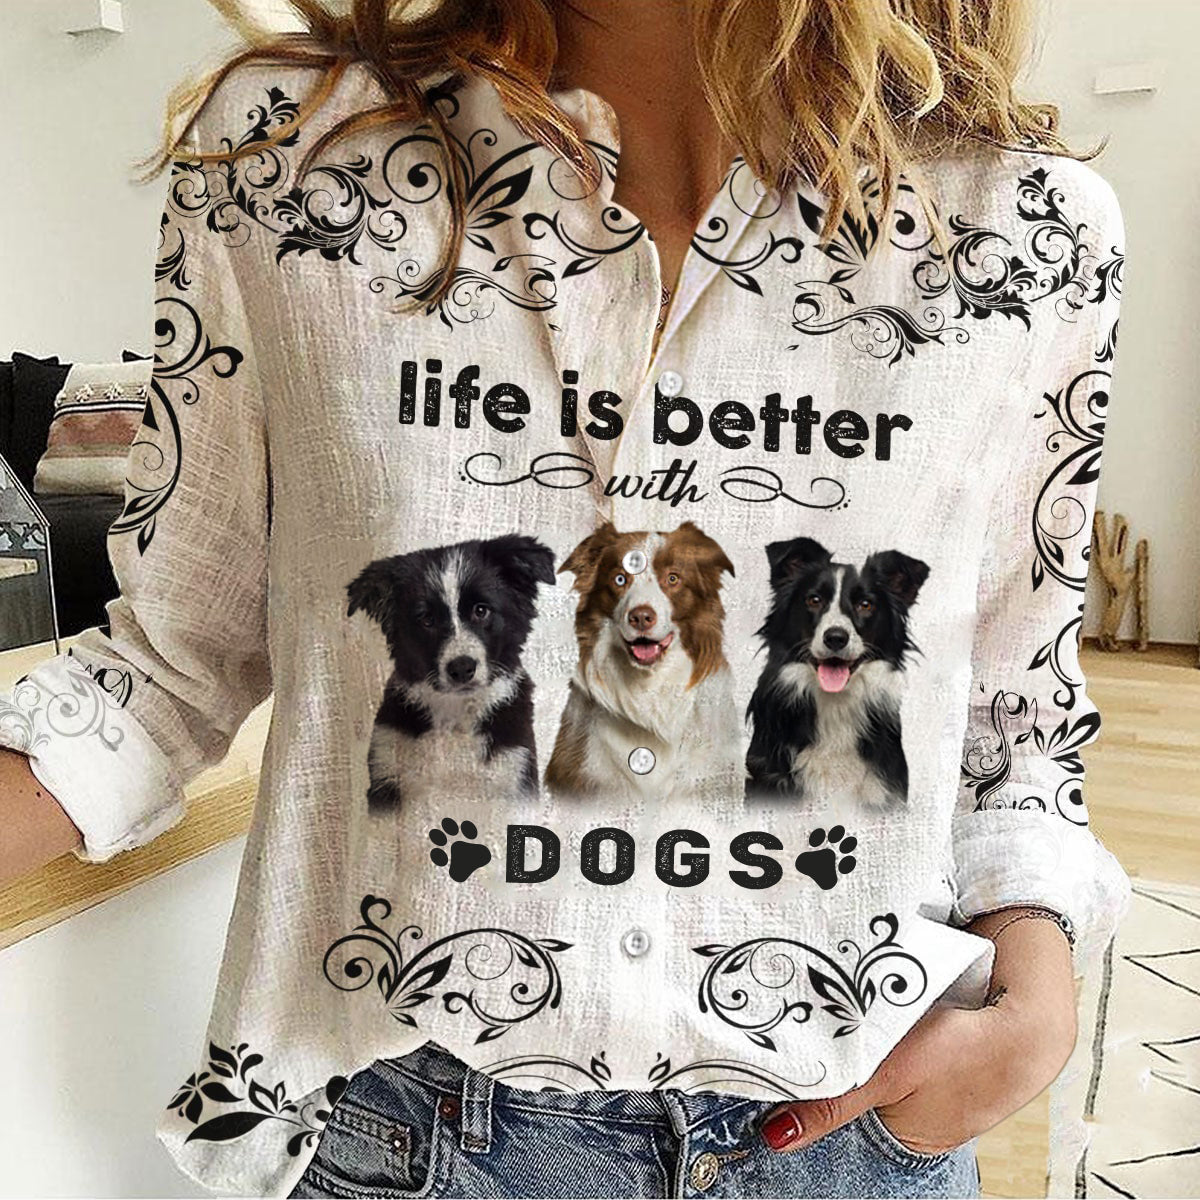 Border Collie-Life Is Better With Dogs Women's Long-Sleeve Shirt